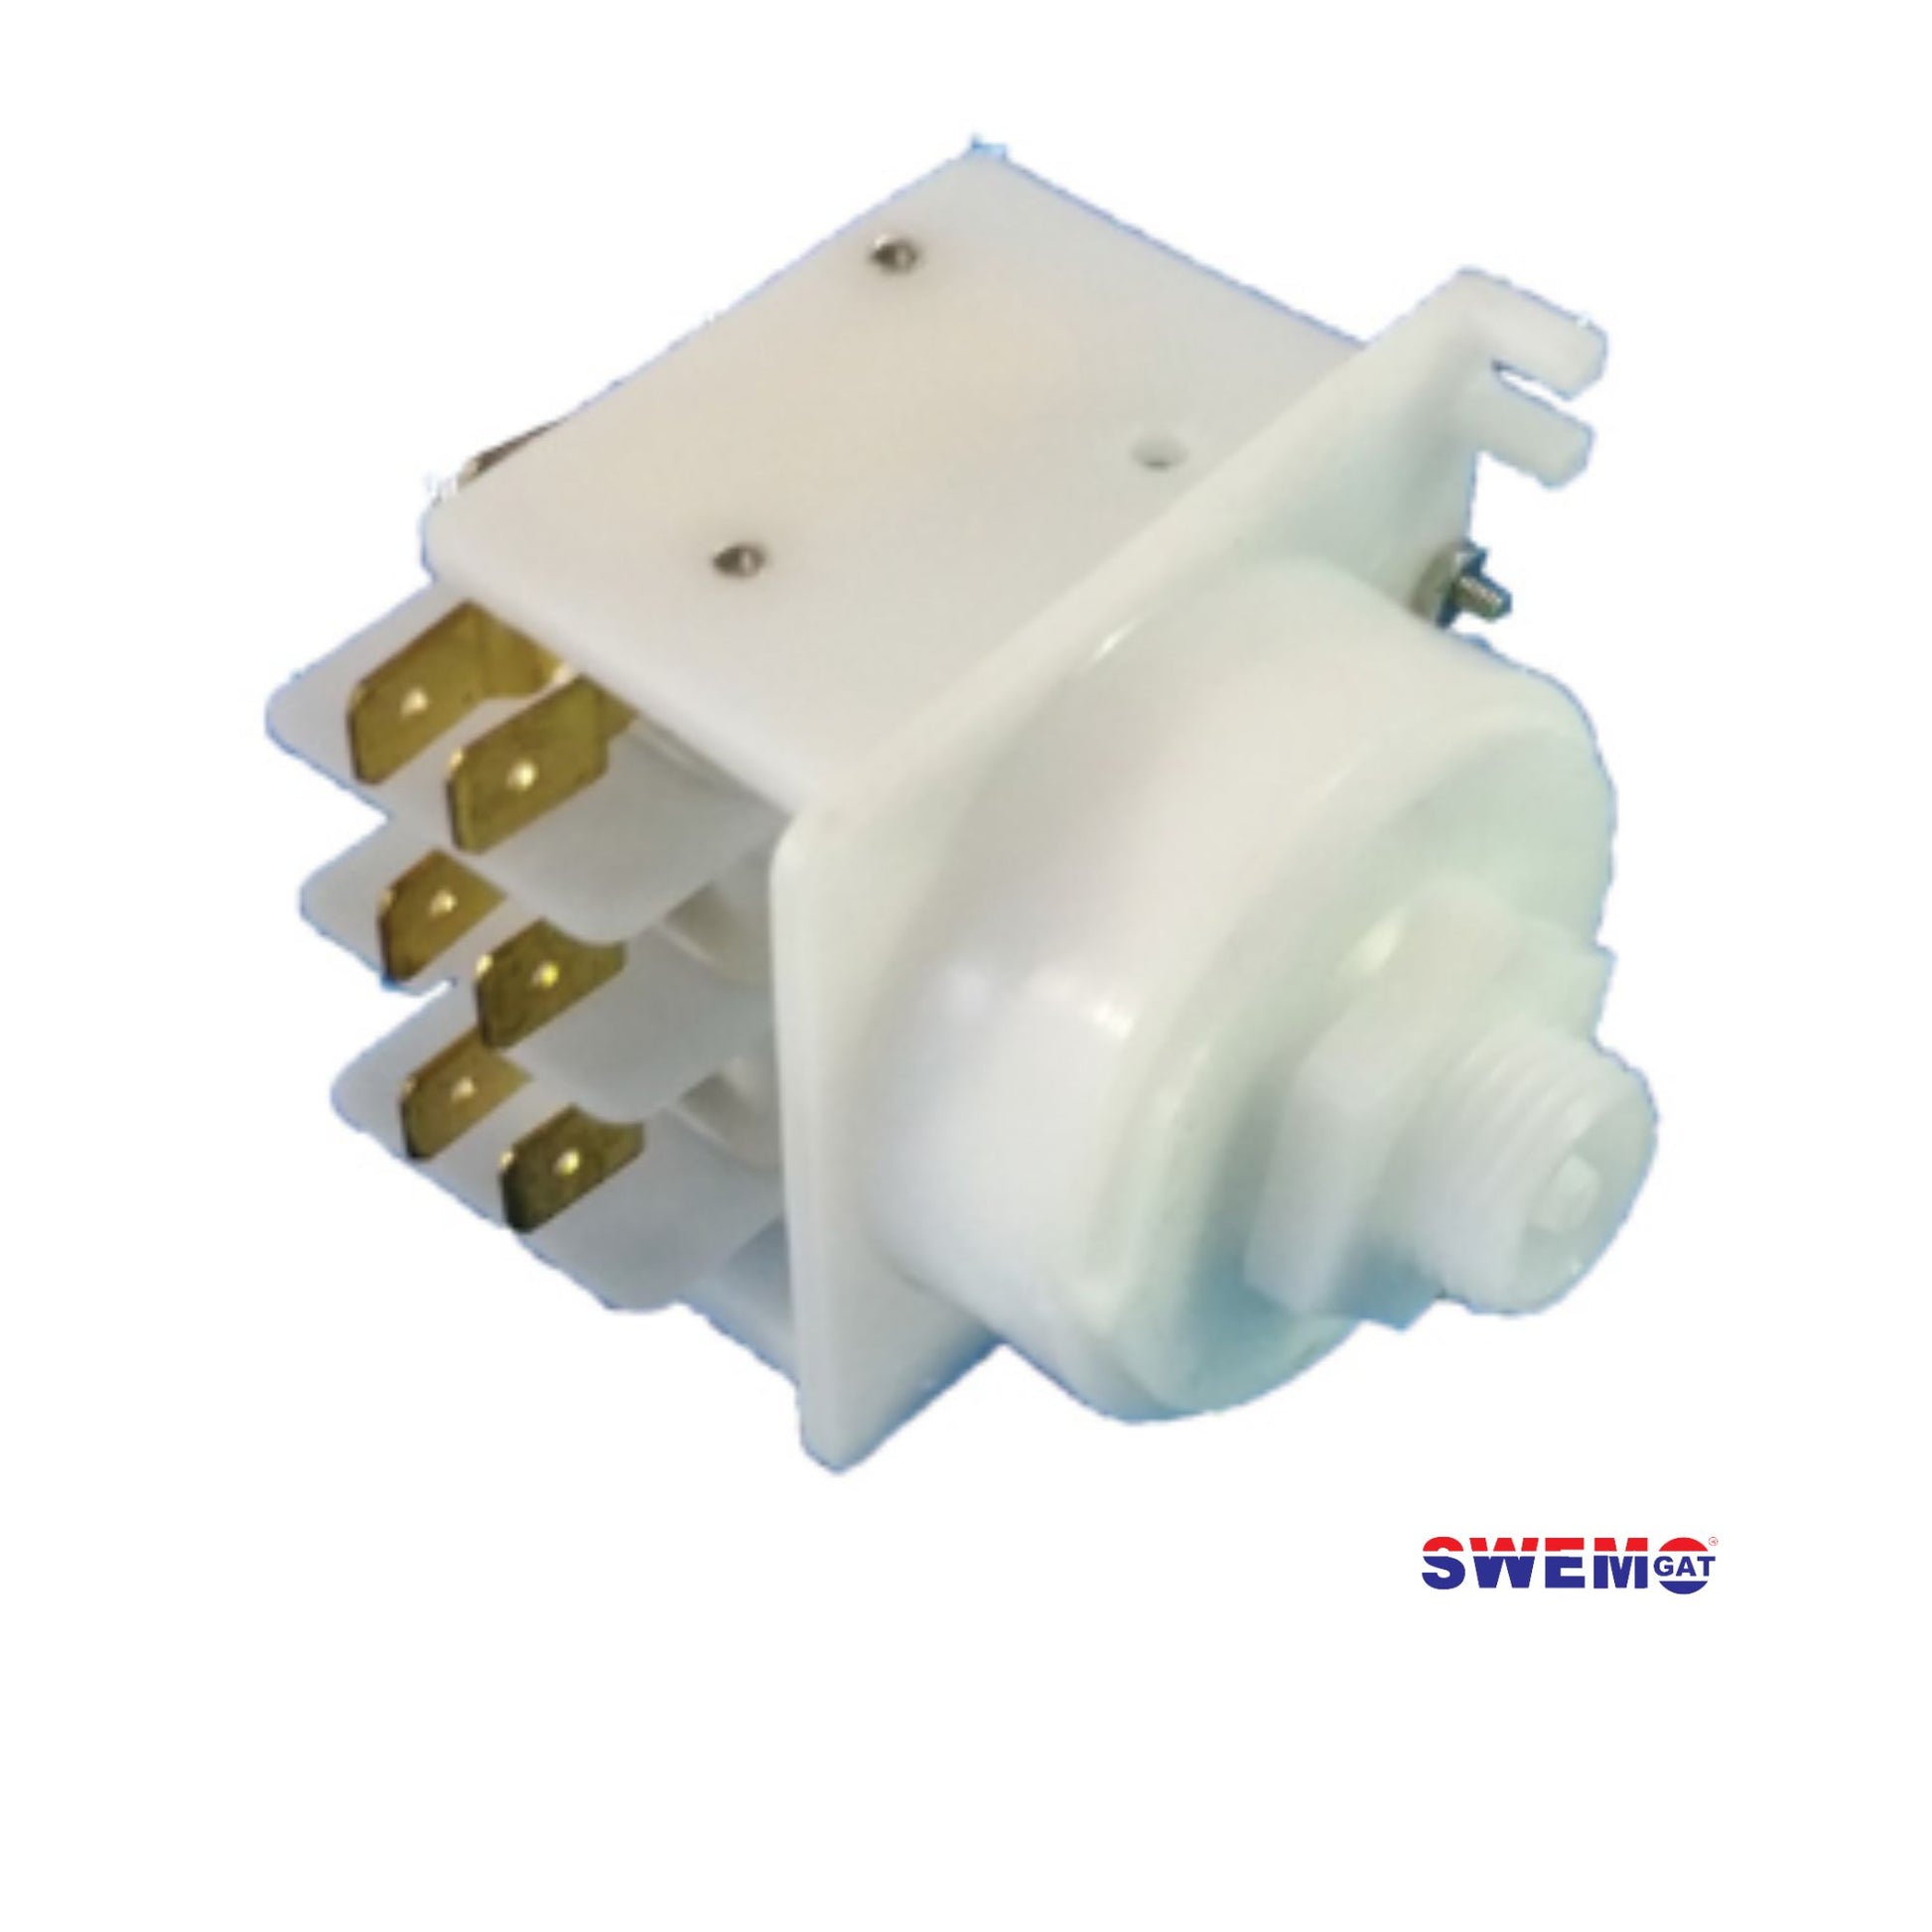 Spa 4-way air switch